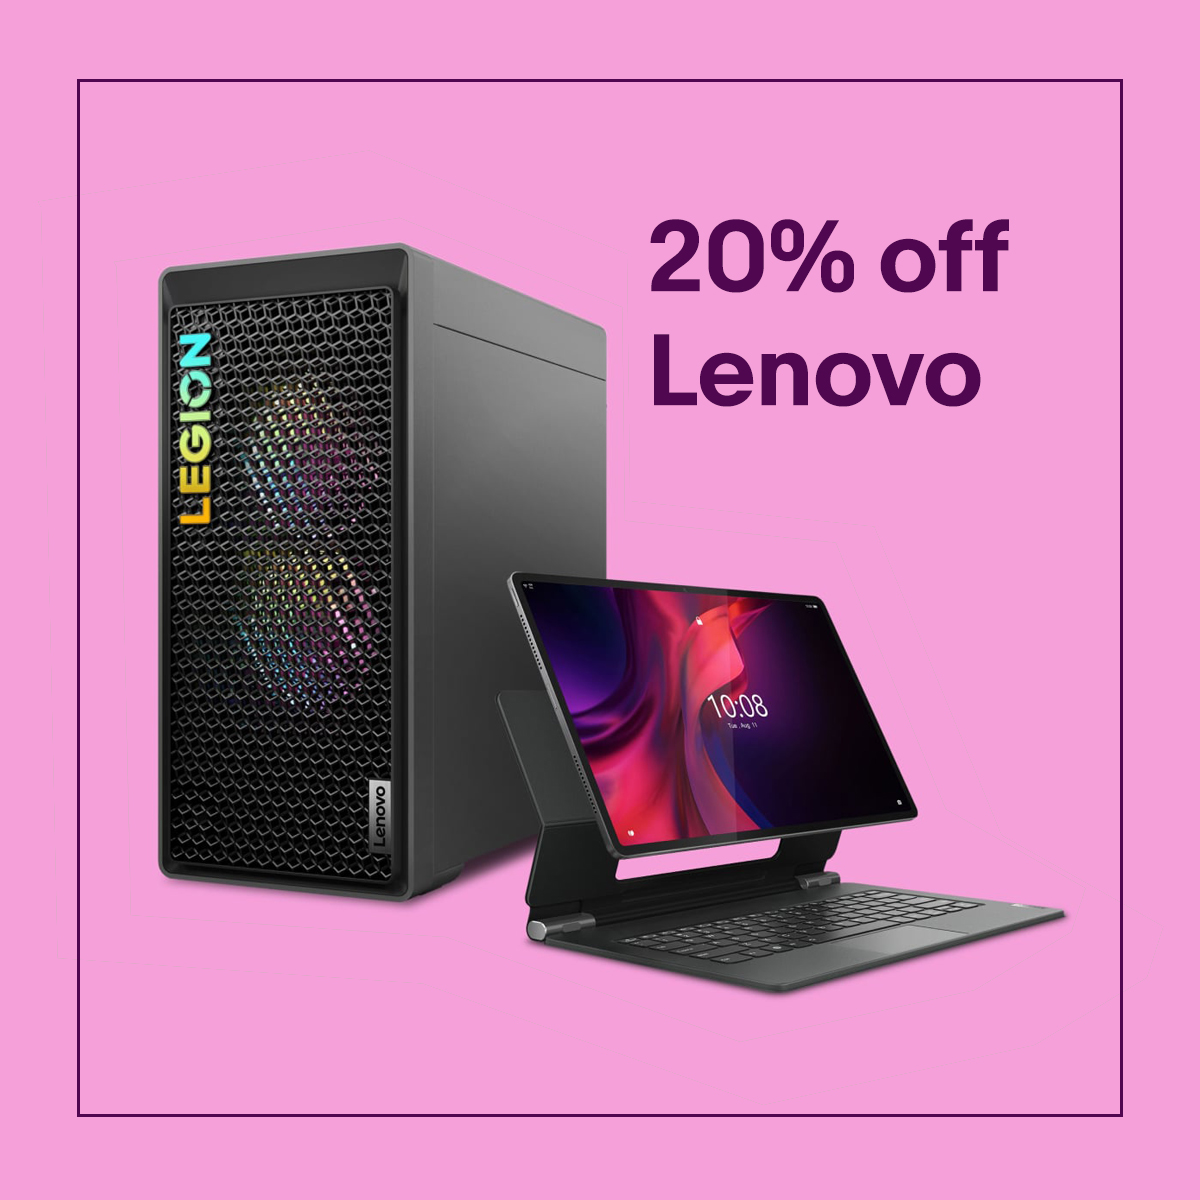 ⚡ Direct from Lenovo ⚡ Upgrade and SAVE with coupon code LENOVO2024, from now until 1/28.*⁠ ebay.to/Lenovo2024 ⁠ Make 2024 the year of saving with these fresh deals on laptops, tablets and more.⁠ ⁠ *Max. discount $350. See full terms.